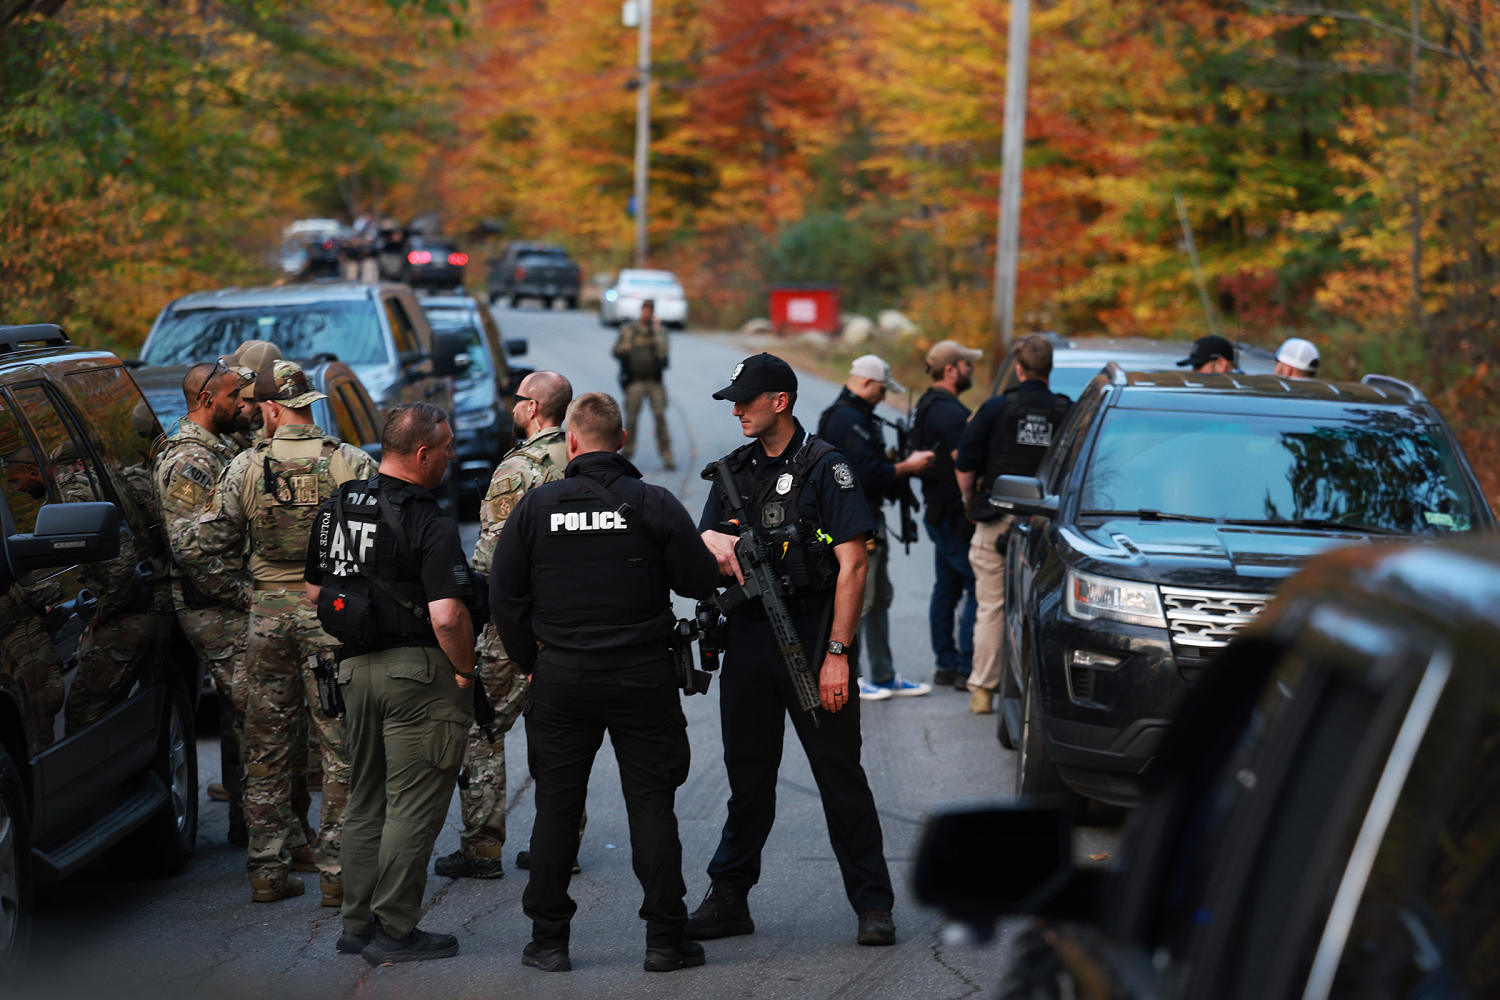 Maine commission investigating mass shootings wants to subpoena killer’s military records